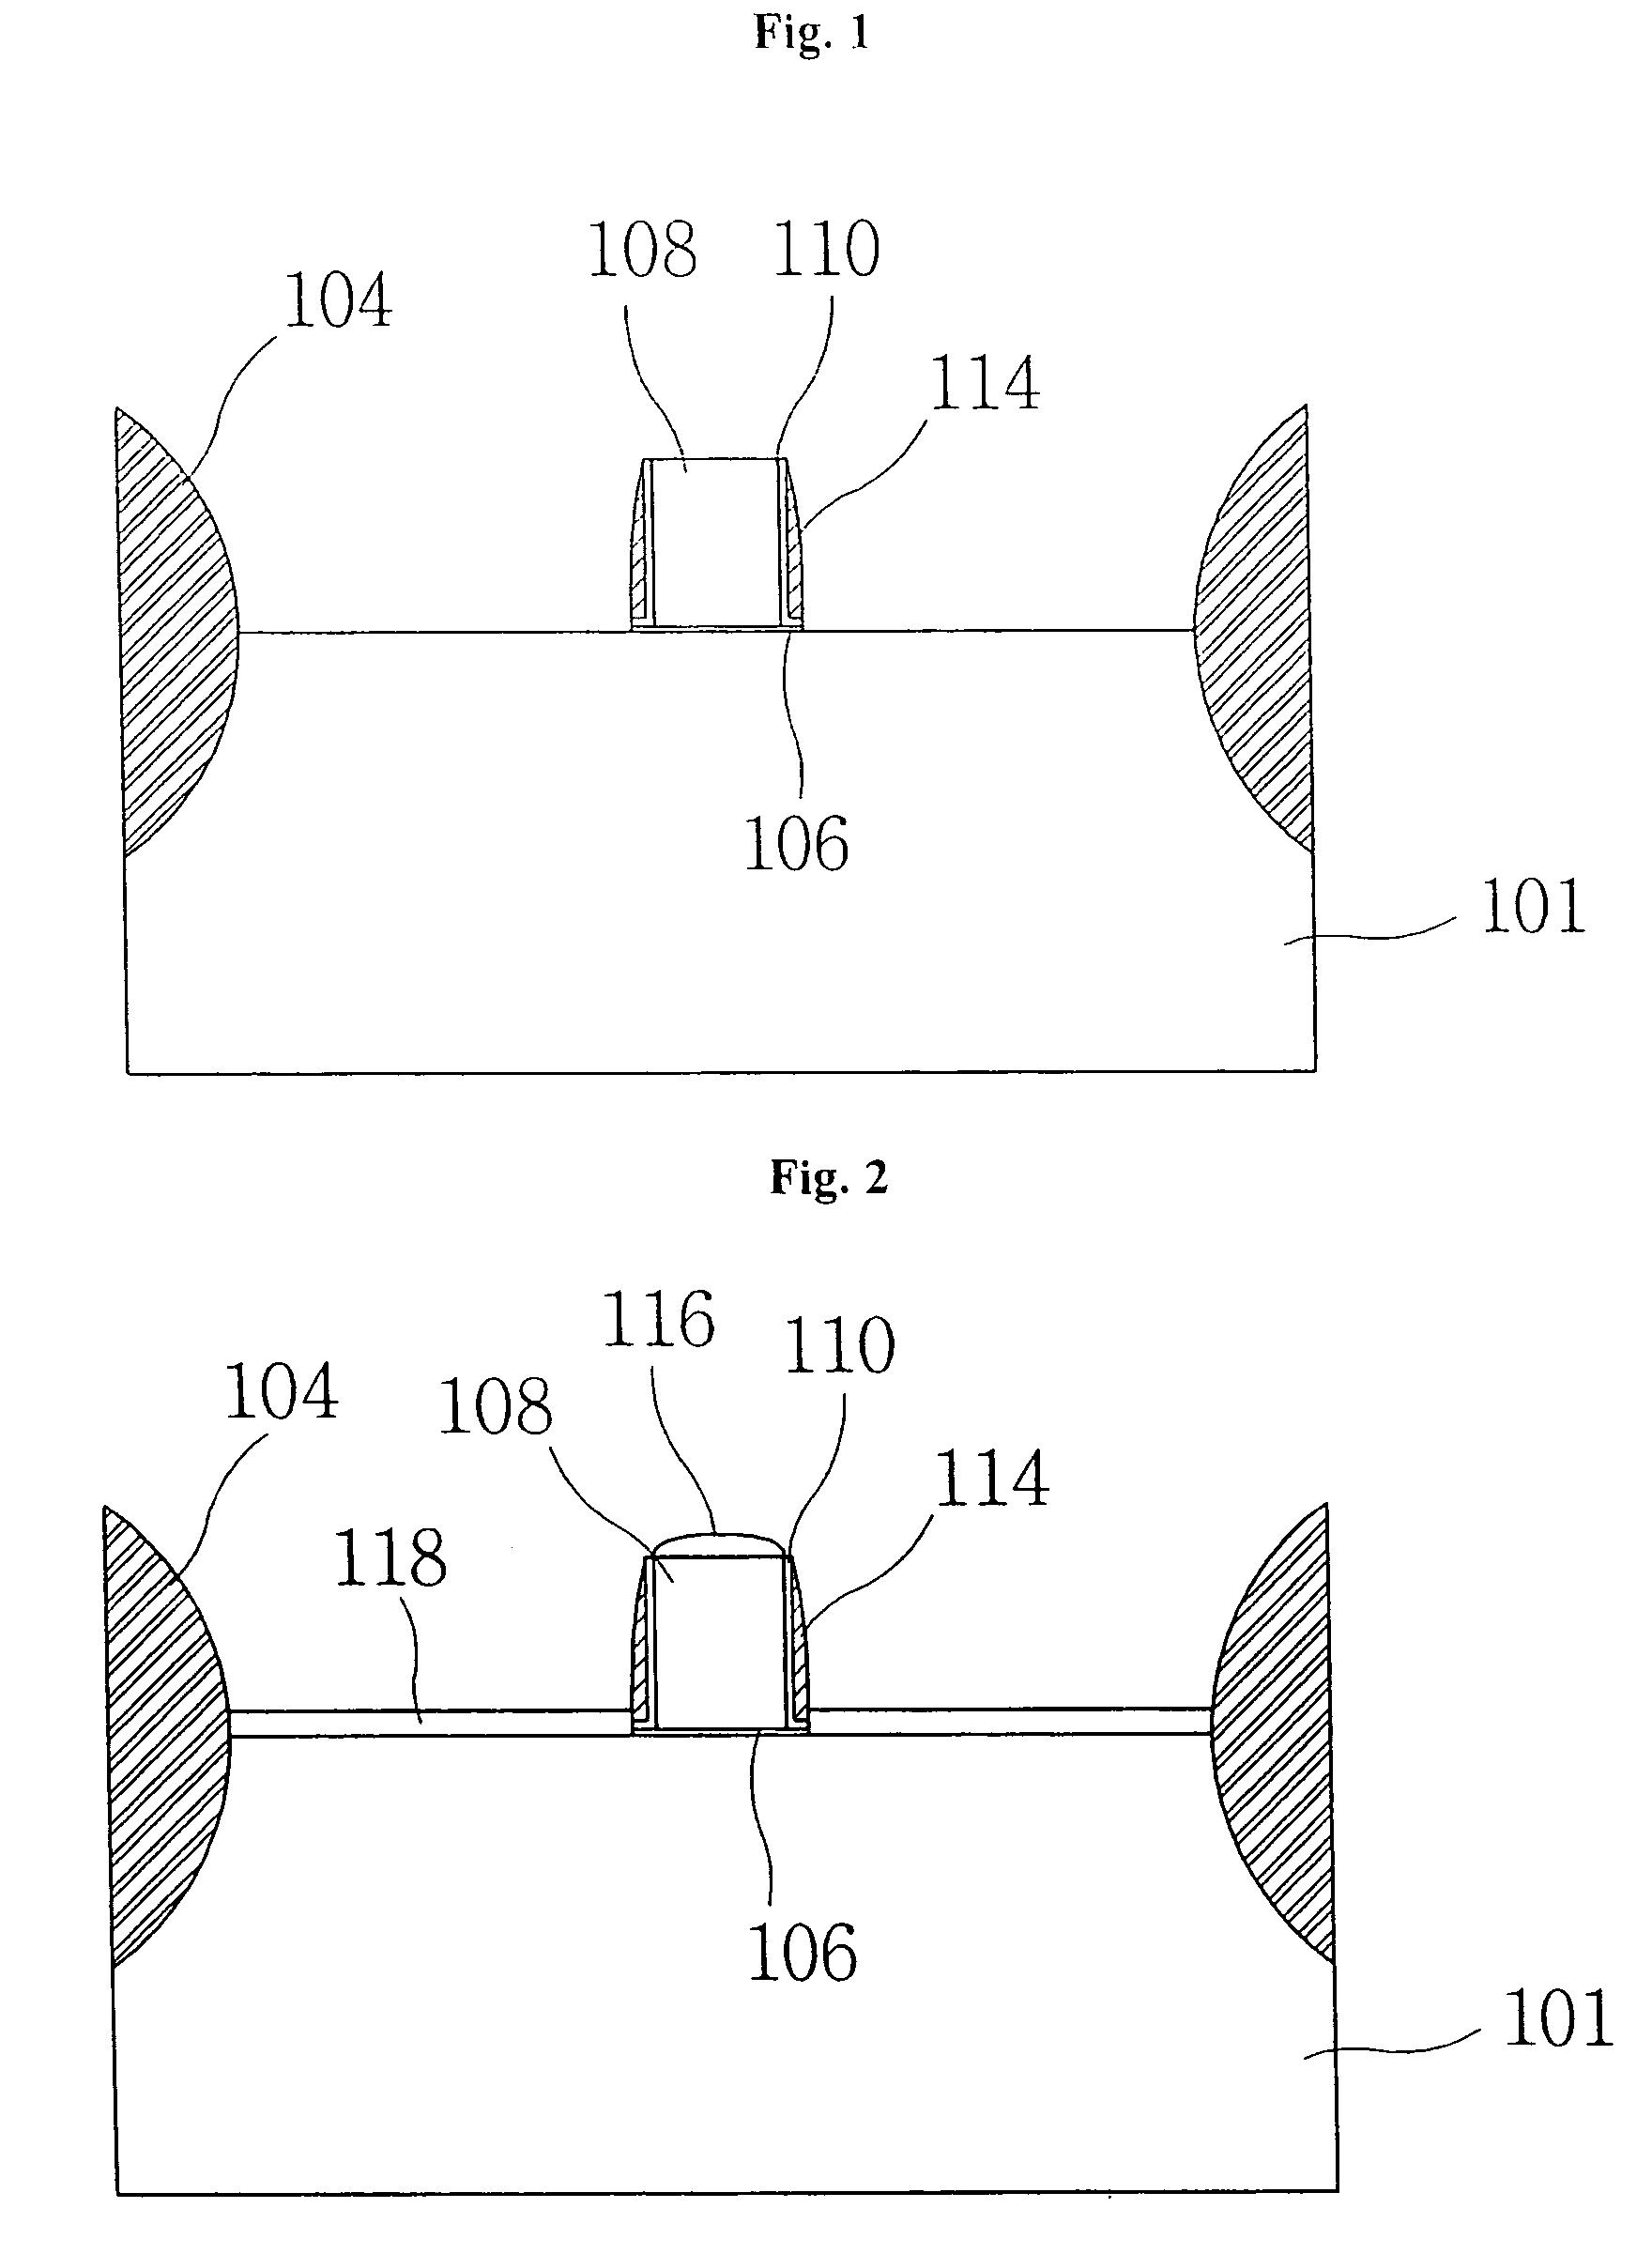 Method of fabricating a MOS transistor with elevated source/drain structure using a selective epitaxial growth process